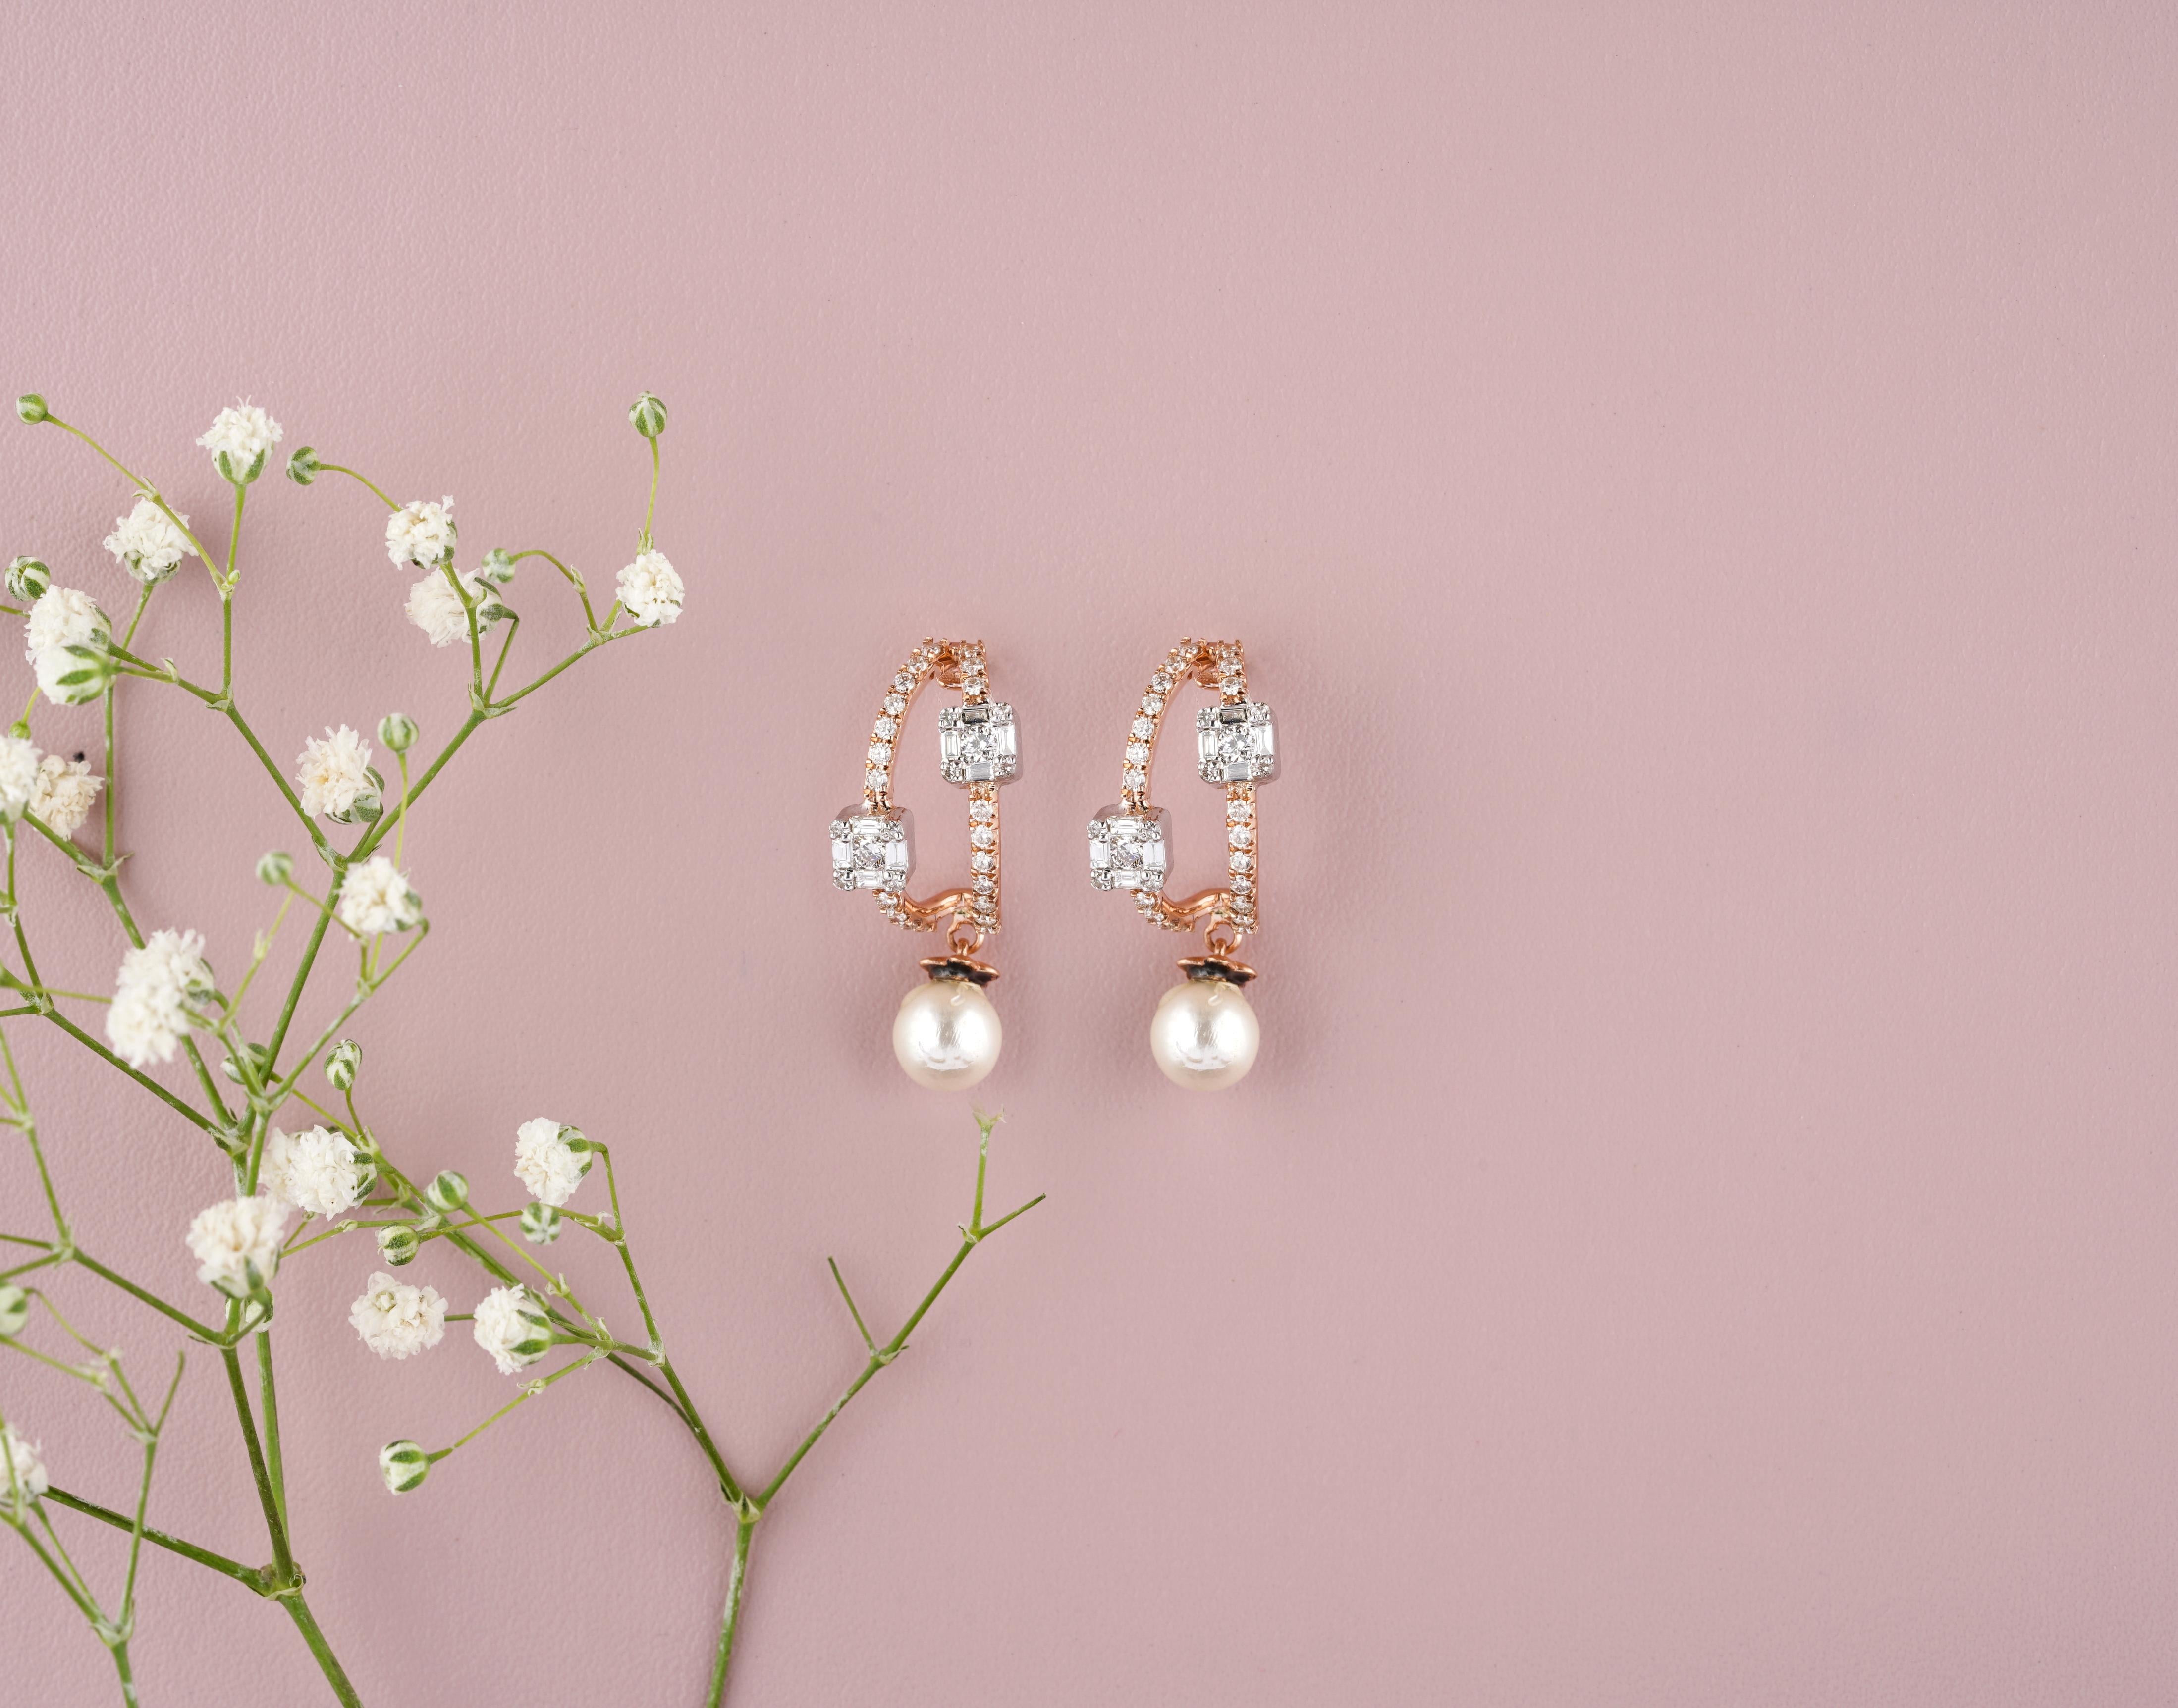 Pearl Drop Diamond Earrings feature a hoop design crafted in rose gold, each adorned with three emerald-cut diamonds evenly spaced along the front of the hoop. Dangling gracefully from the bottom of each hoop is a single lustrous pearl, adding an